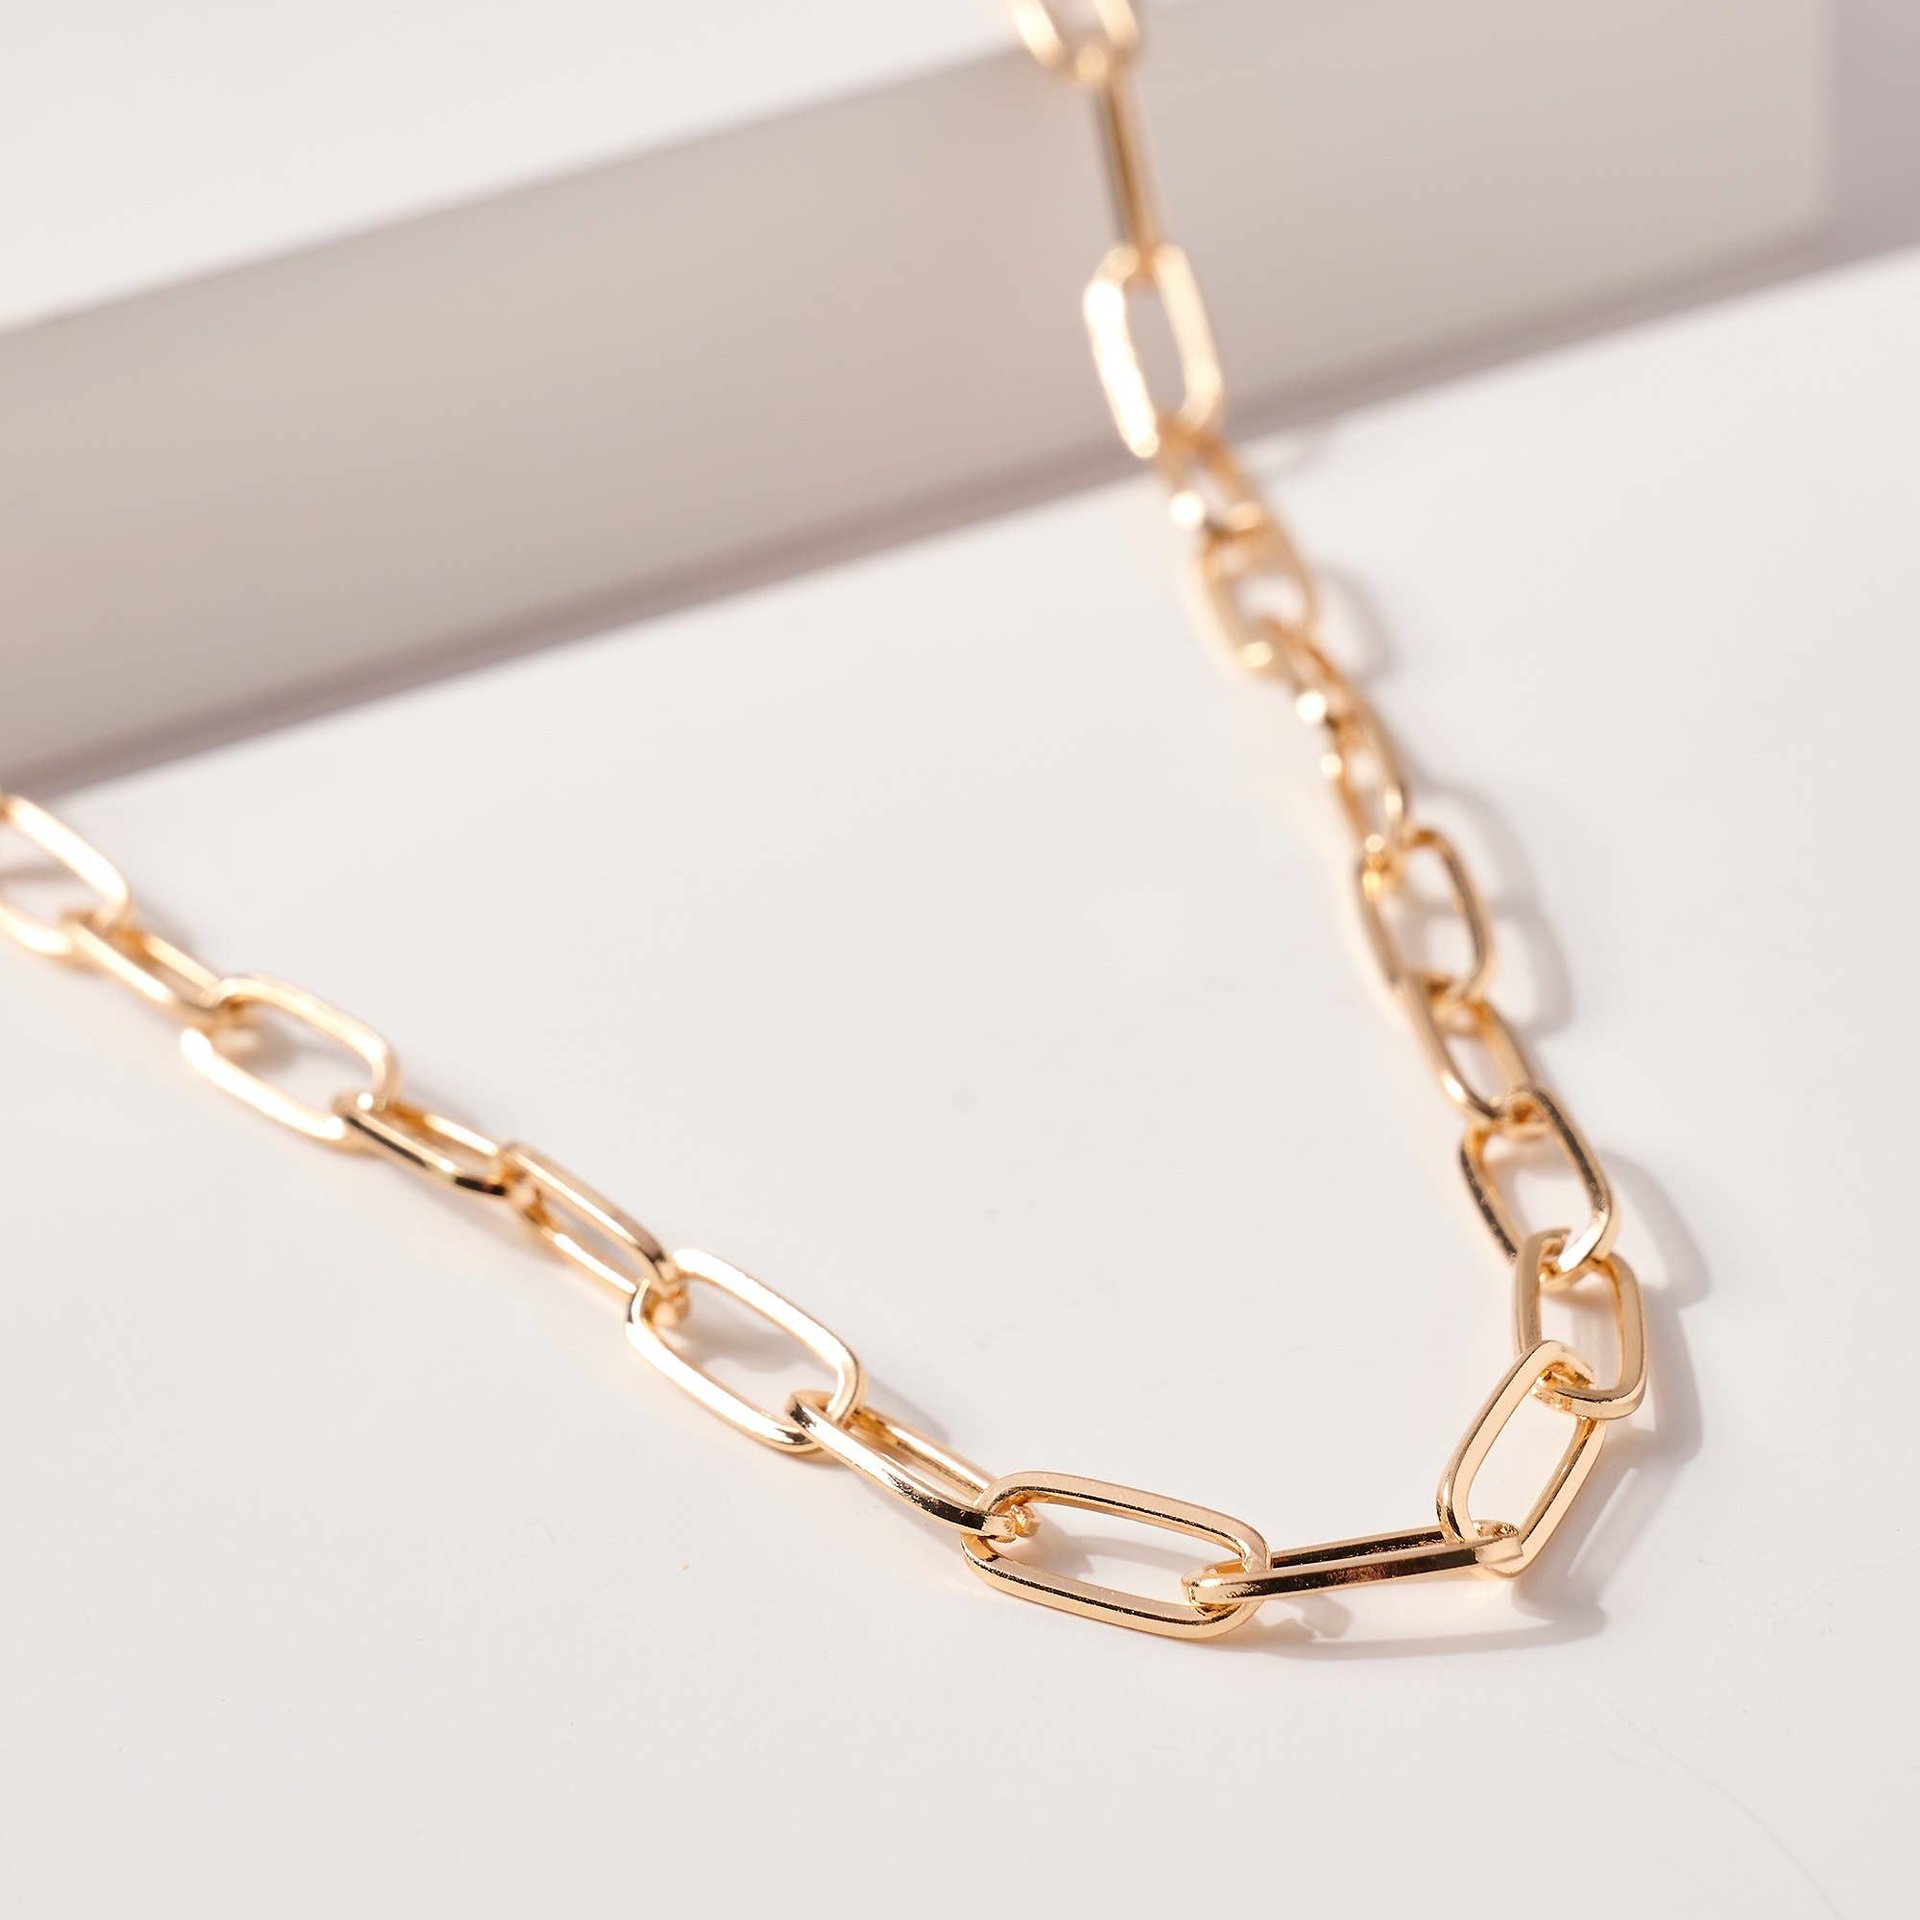 Gold  Paperlink Chain.Necklace